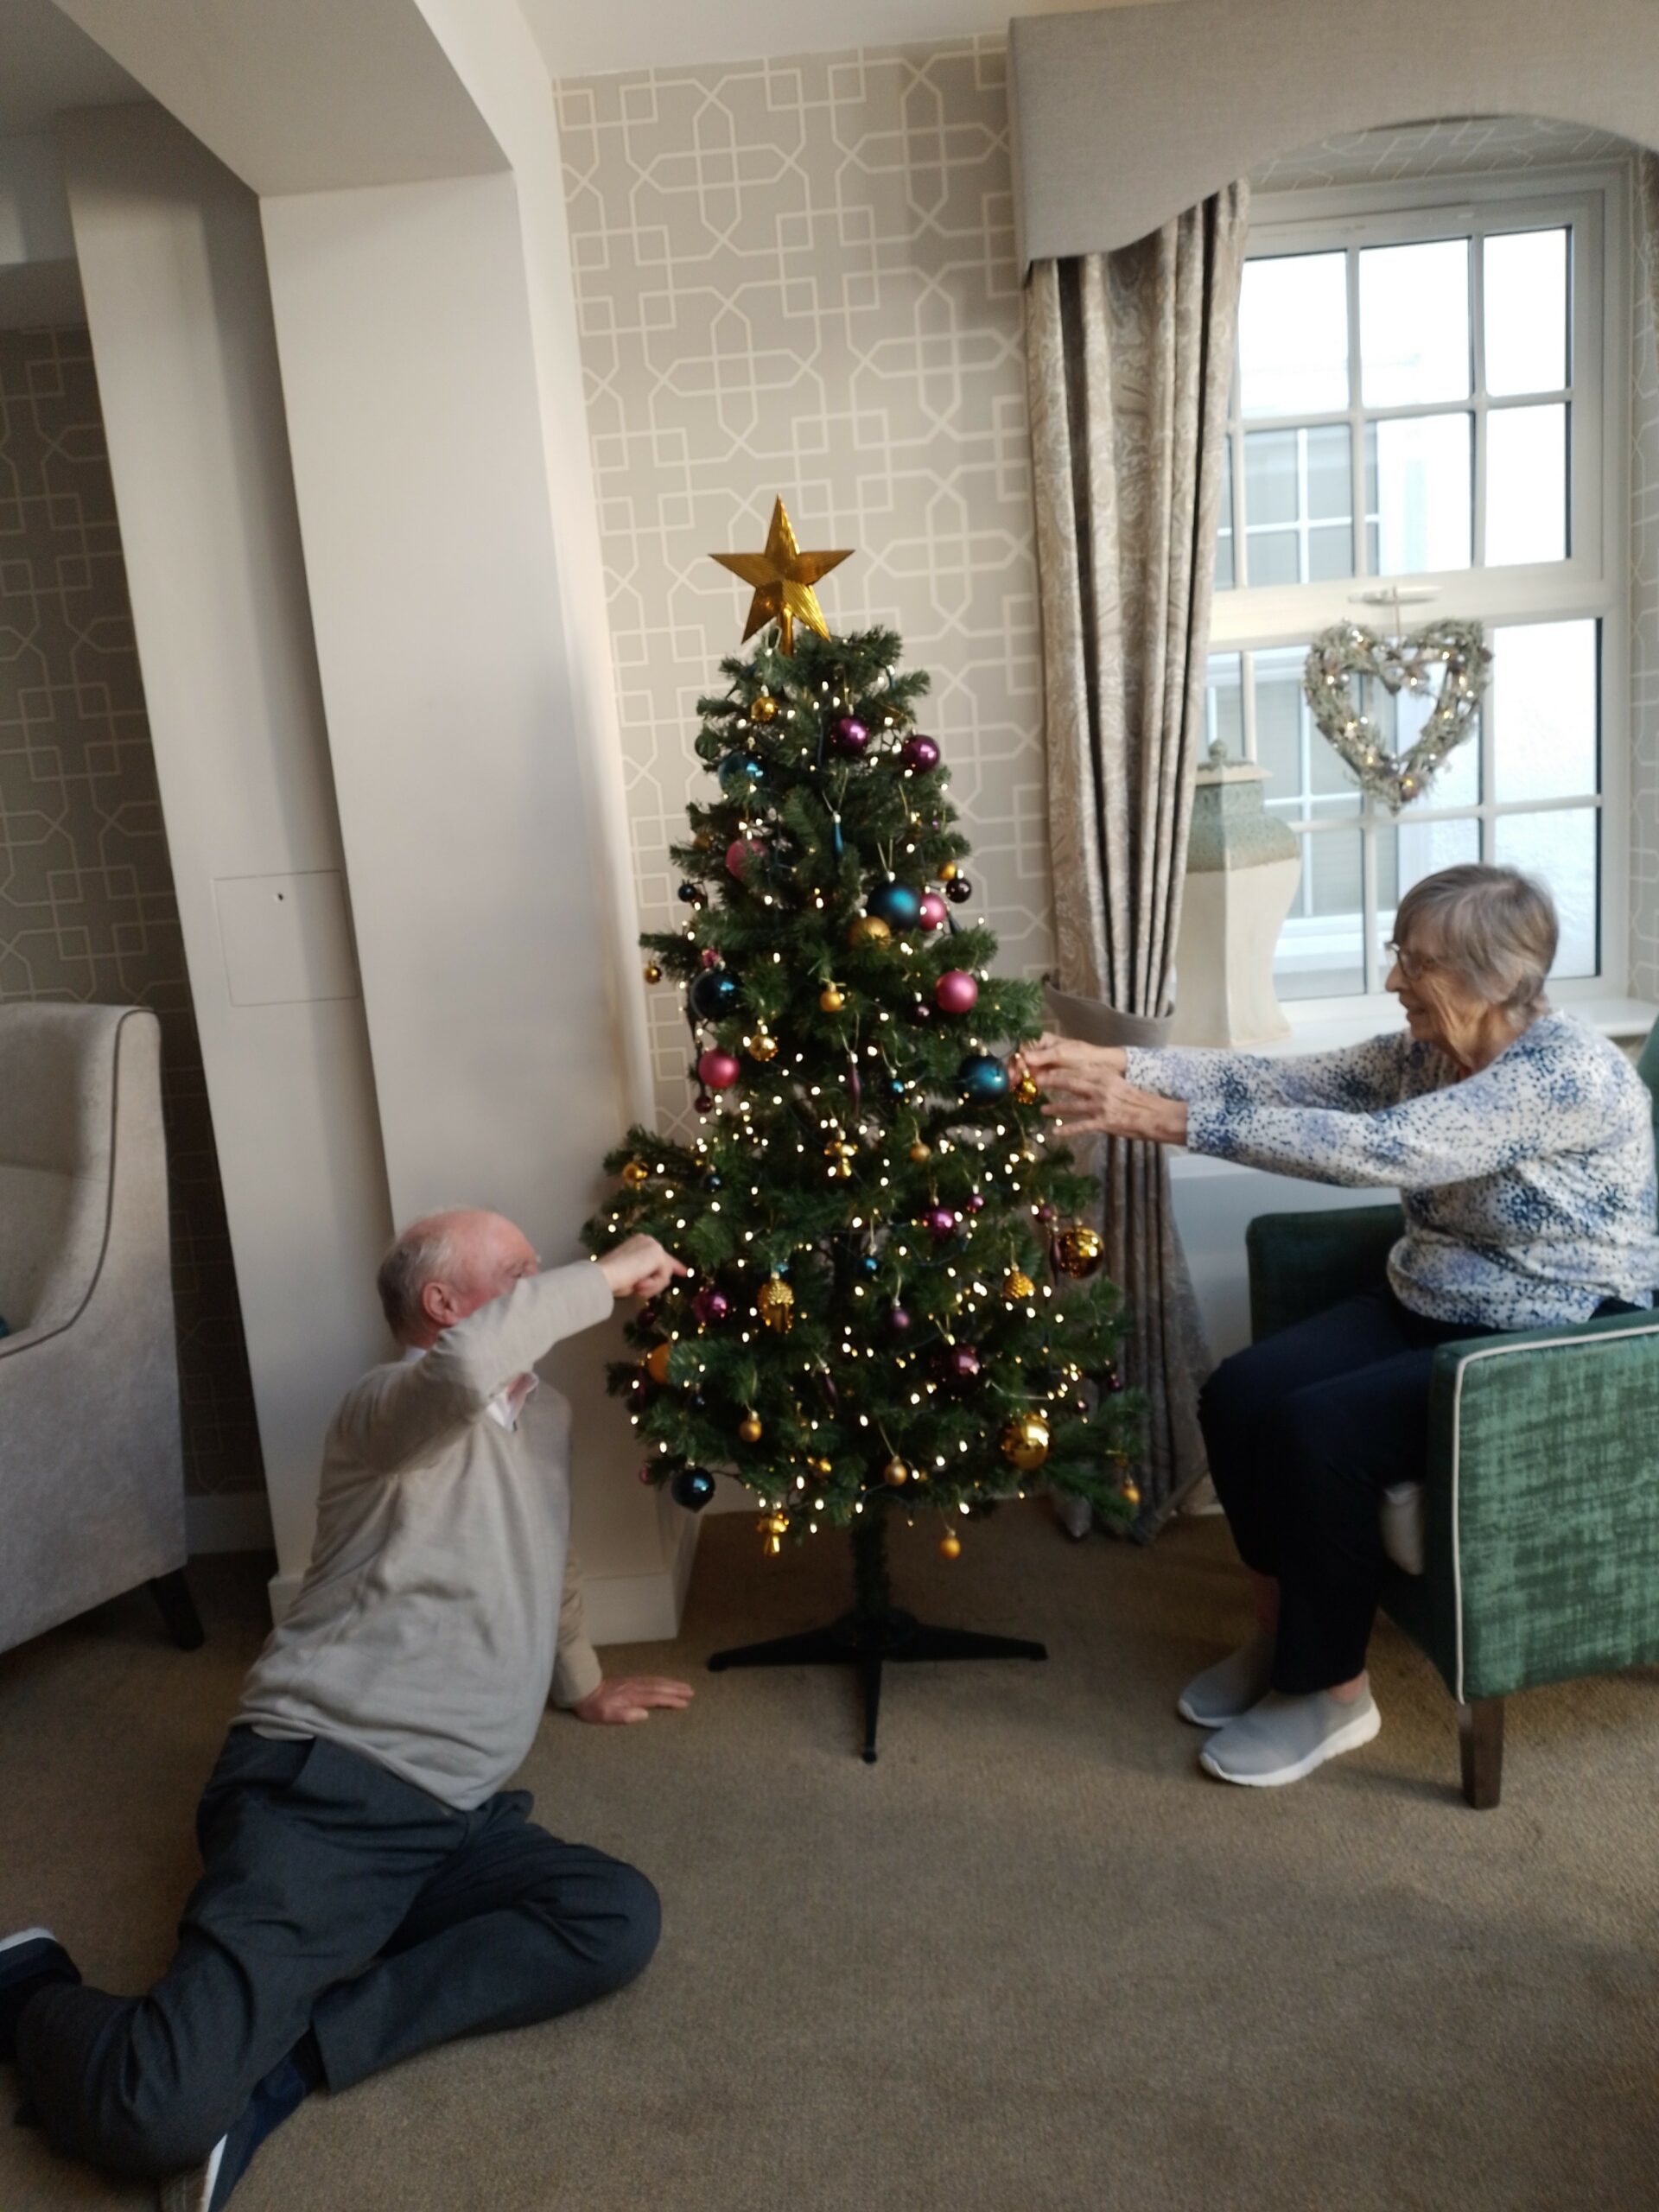 Residents Doing Christmas Tree Decorations